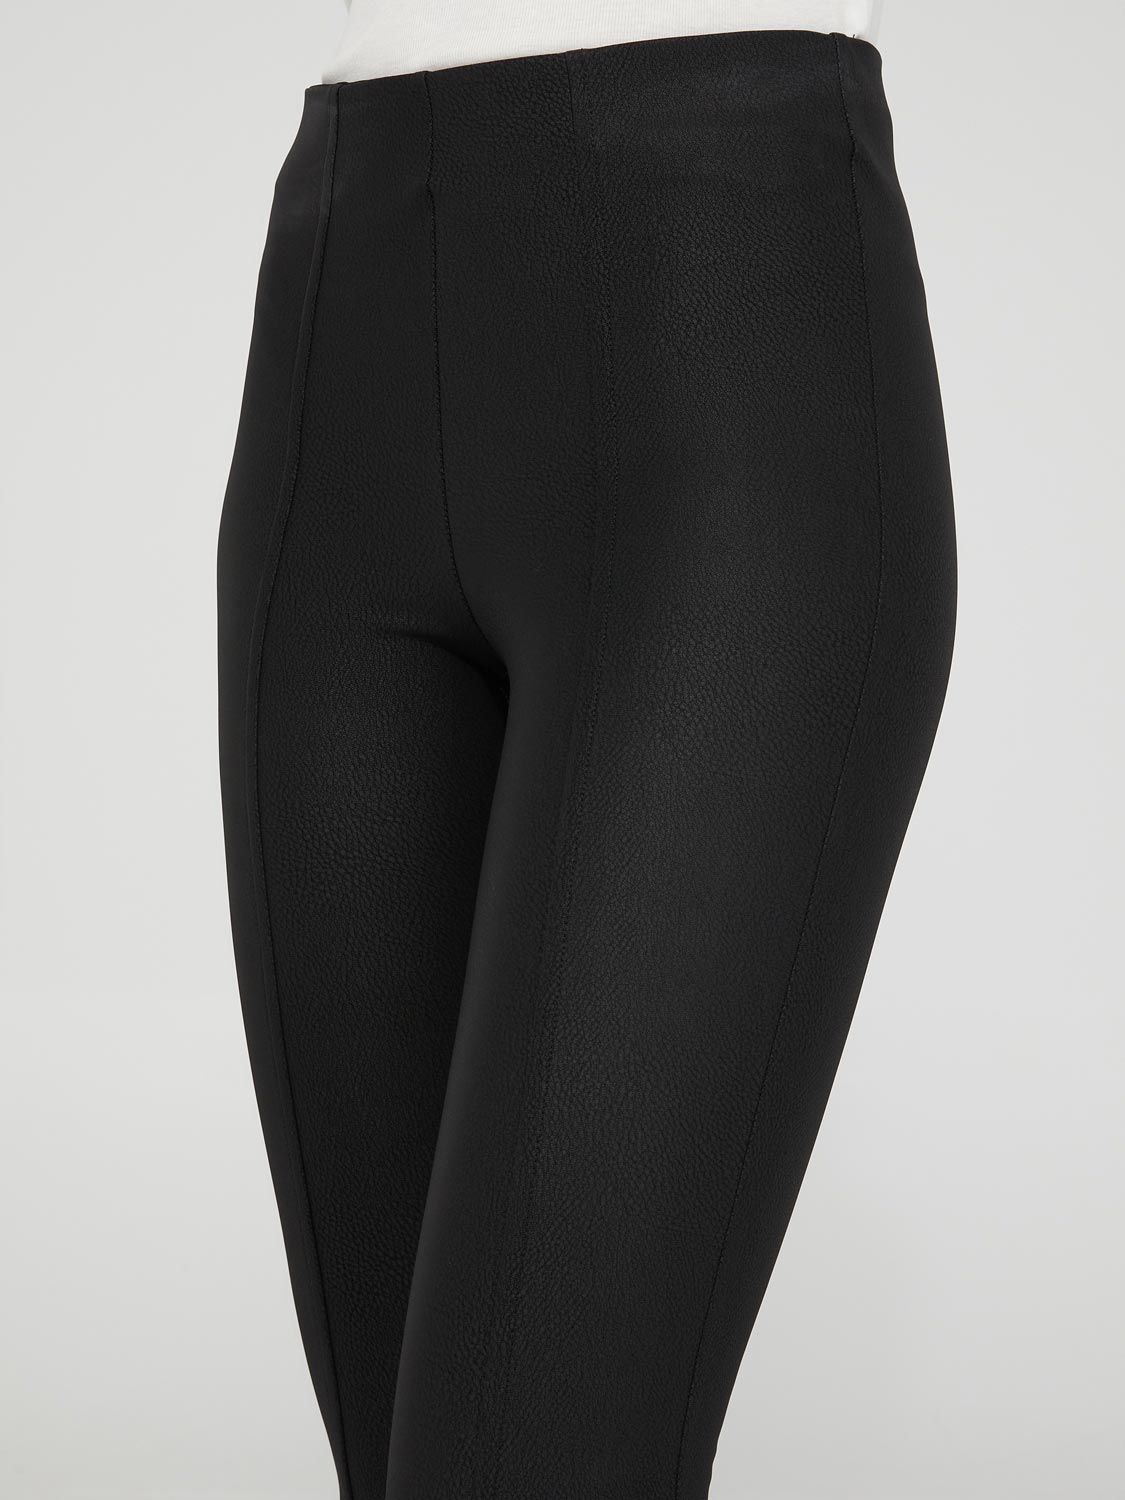 Athleta moto leggings grey heathered with faux leather side leg accents &  zipper